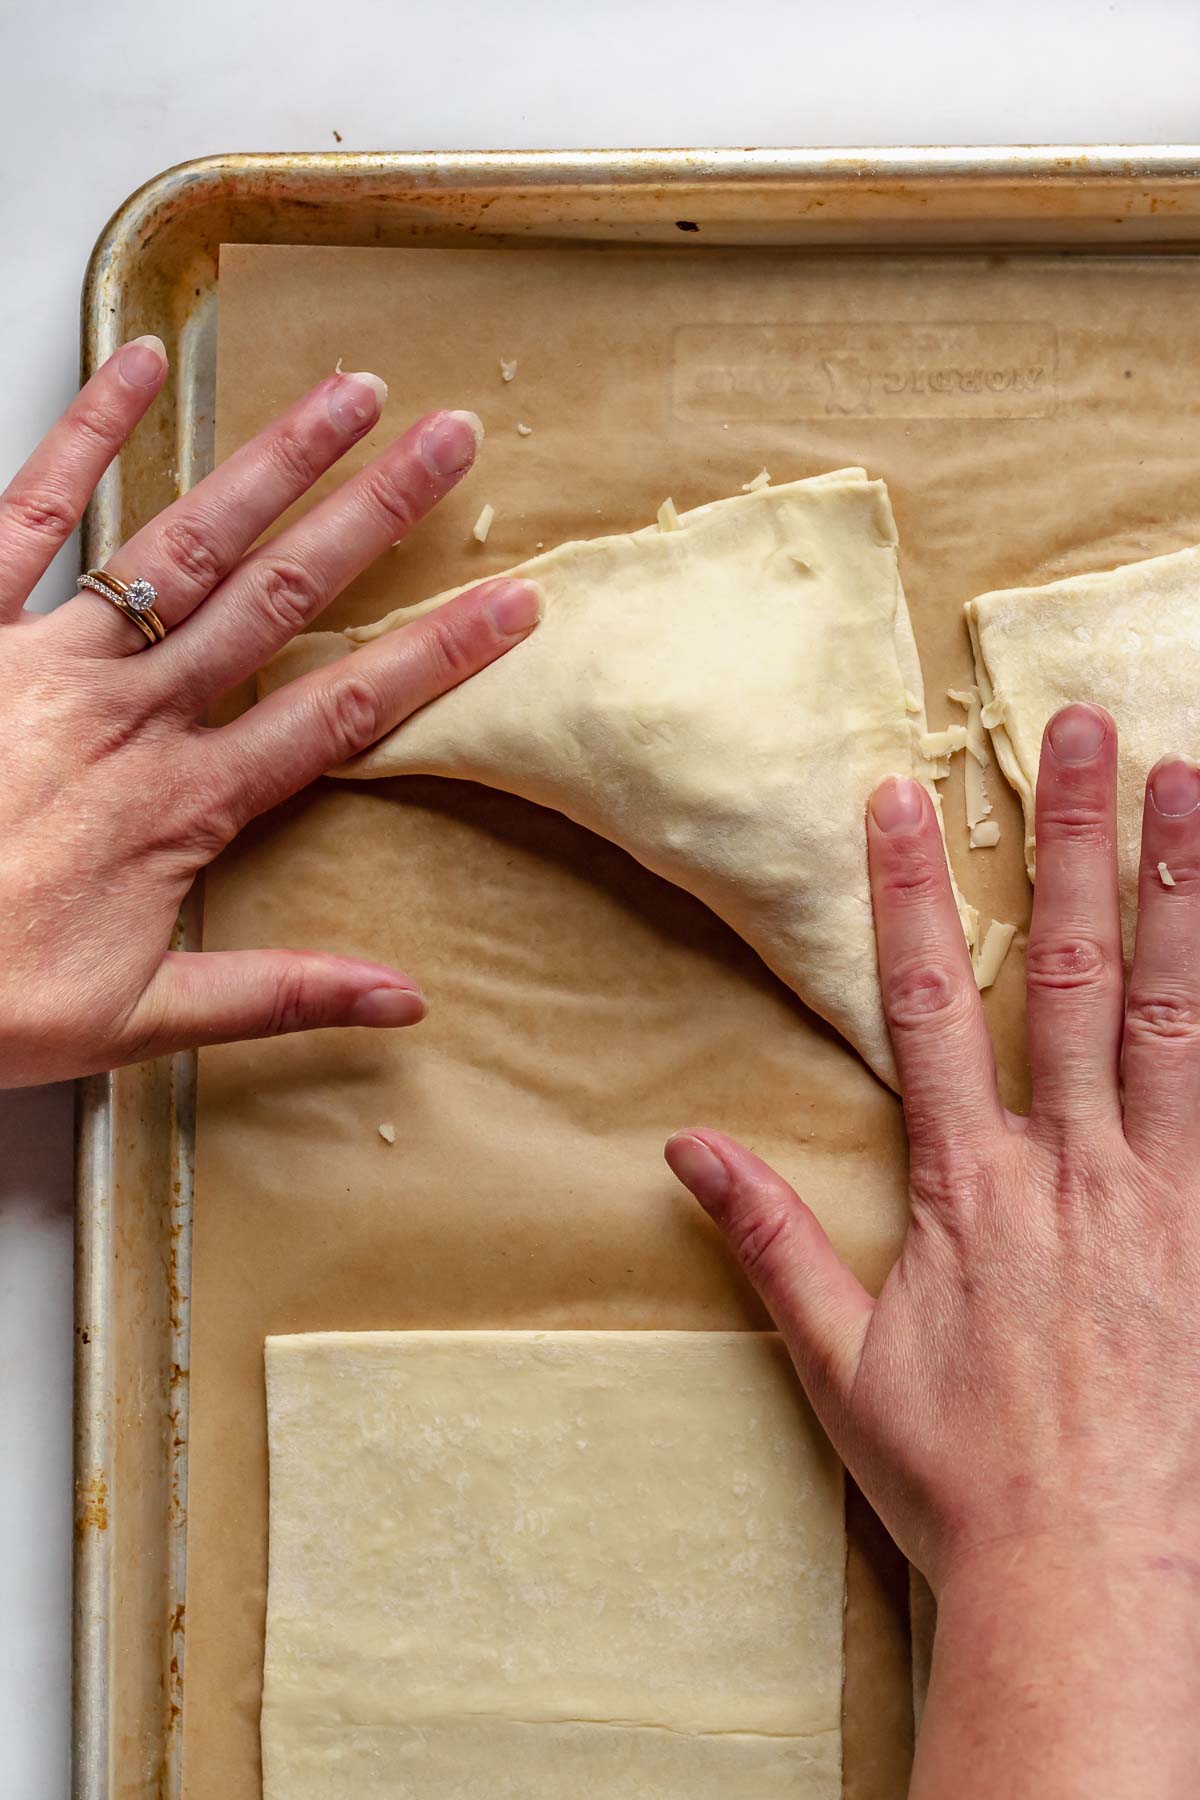 Fingers press the turnovers to seal it closed.